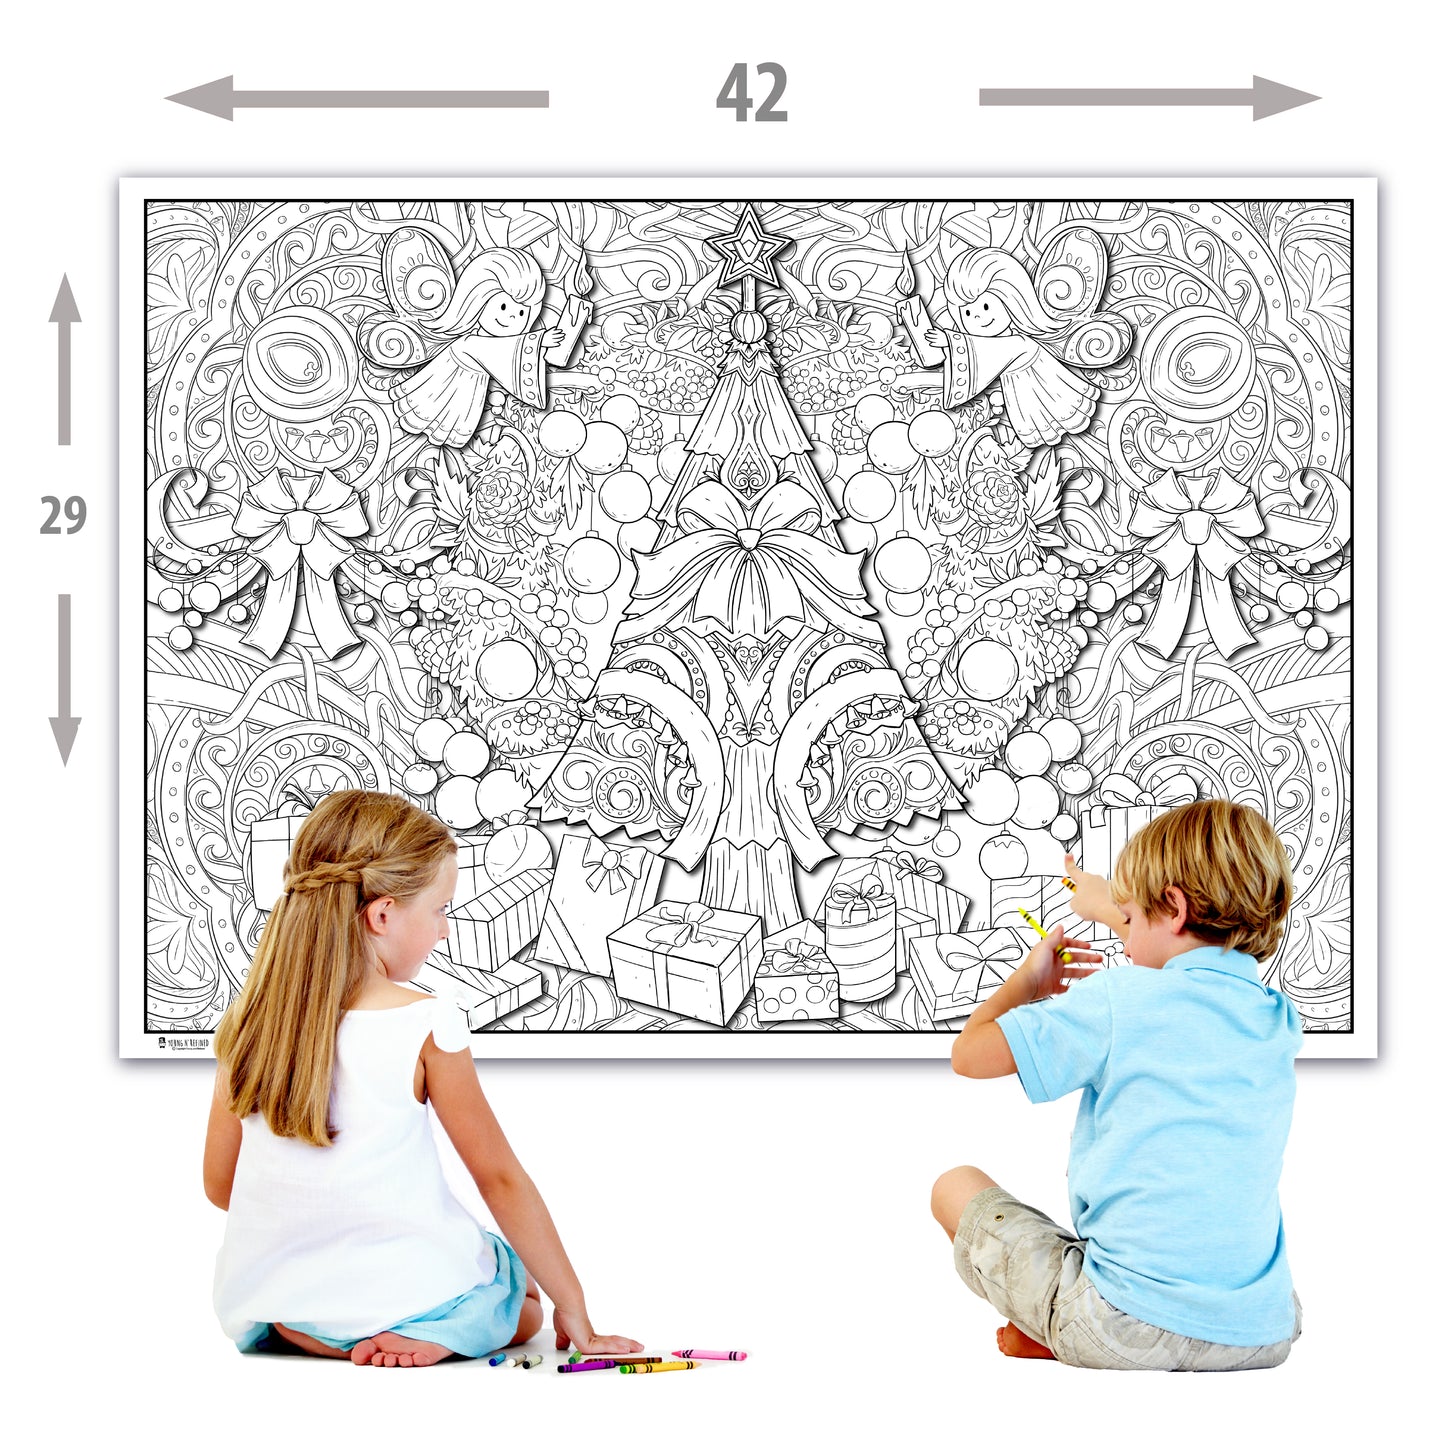 2 Giant Coloring Page Posters Activities for Kids Young N Refined 30x42